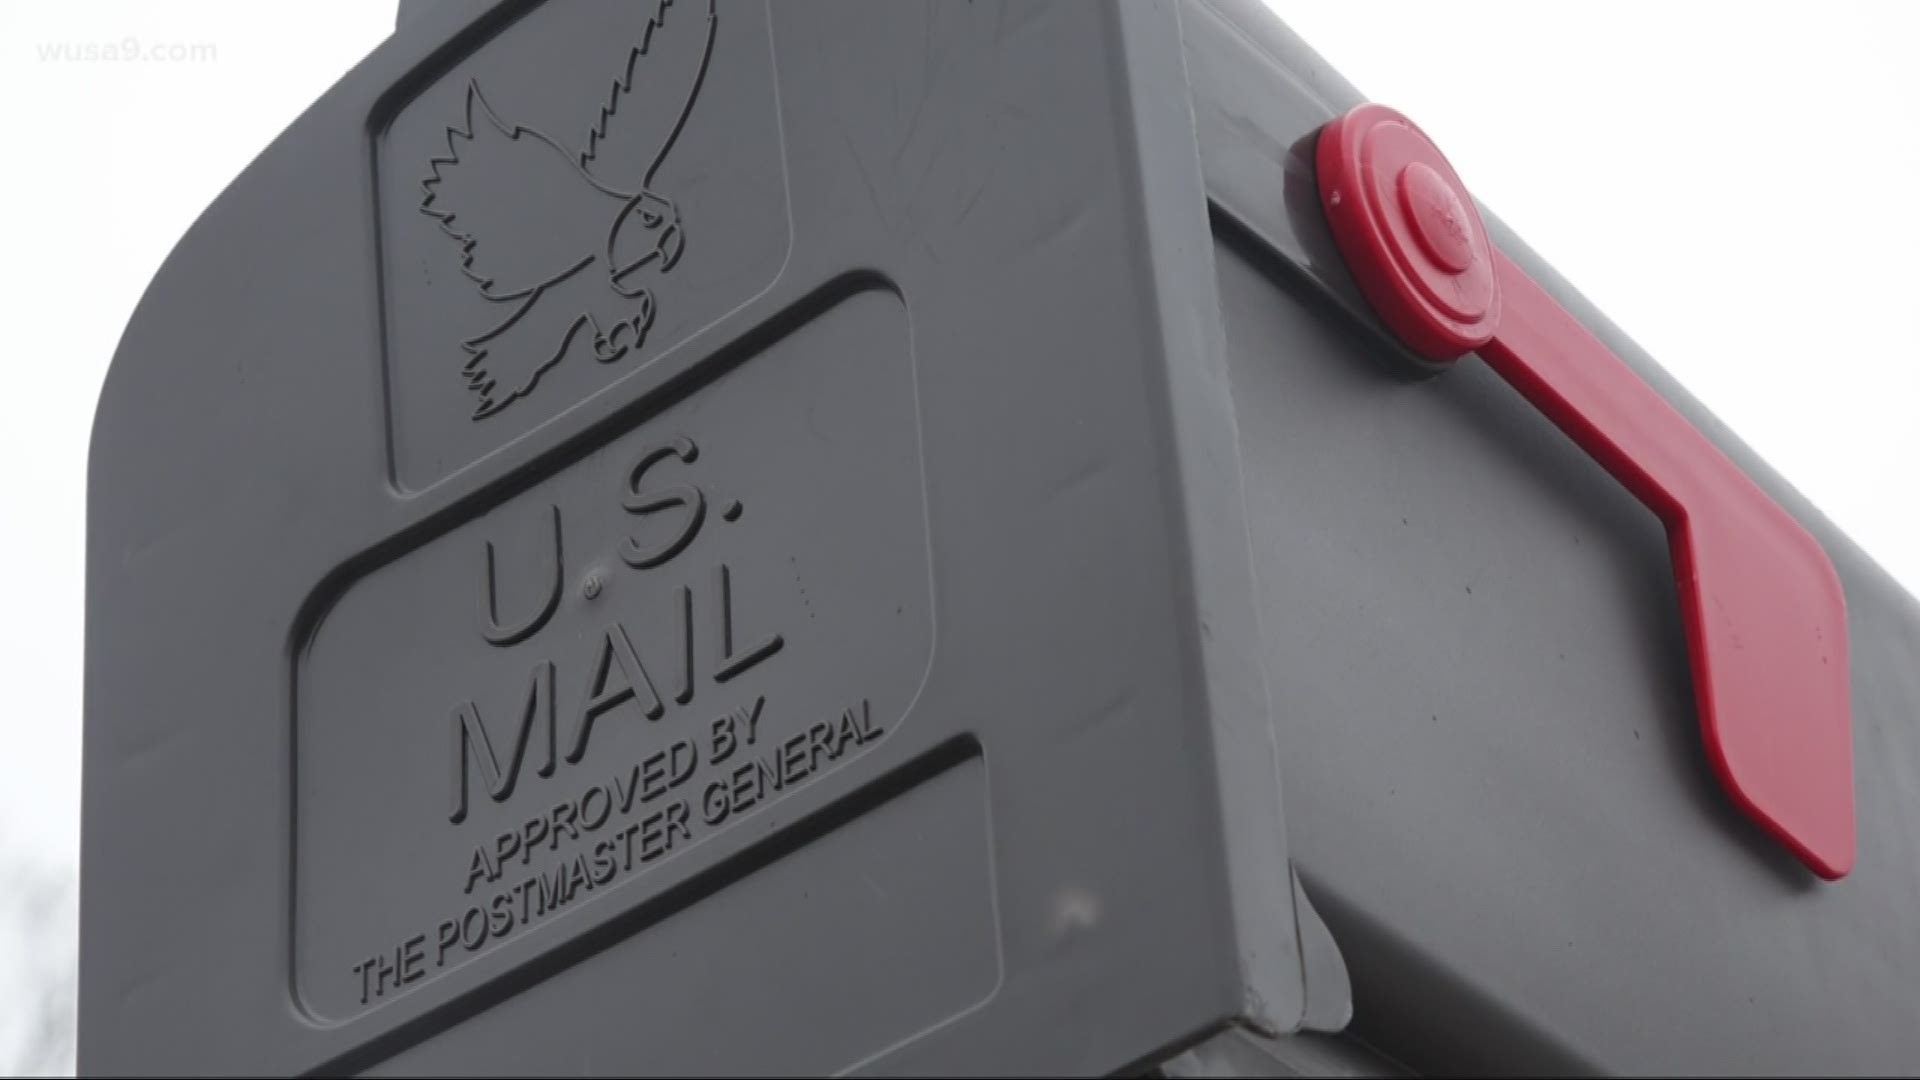 An odd story out of tidewater Virginia where a former postal worker was thrown into jail for failing to deliver 5-thousand pieces of mail.